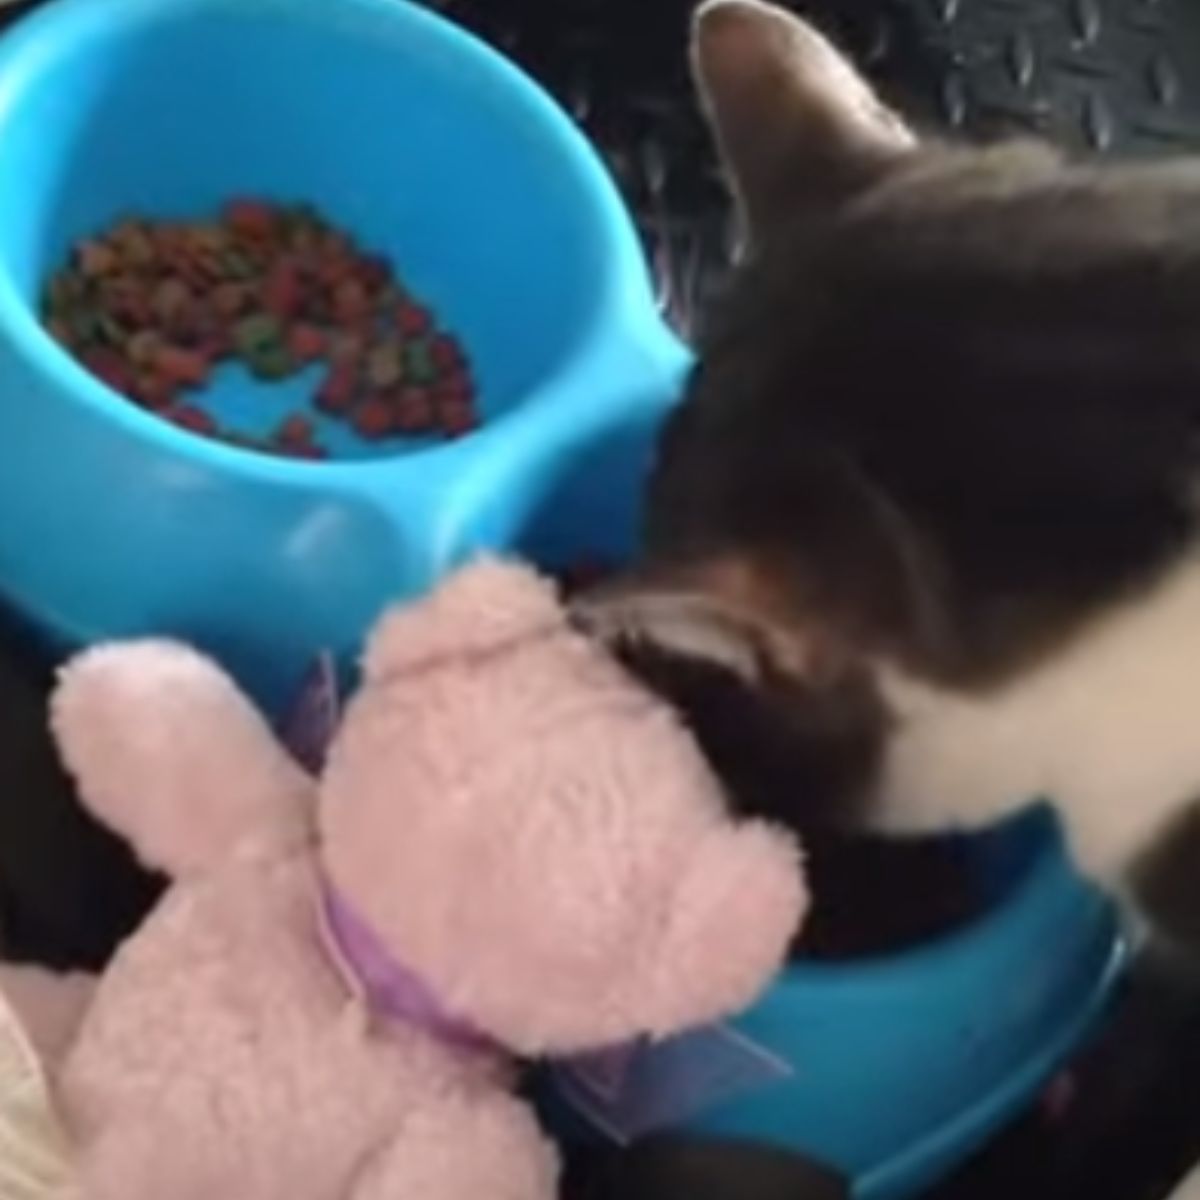 cat and teddy bear eating